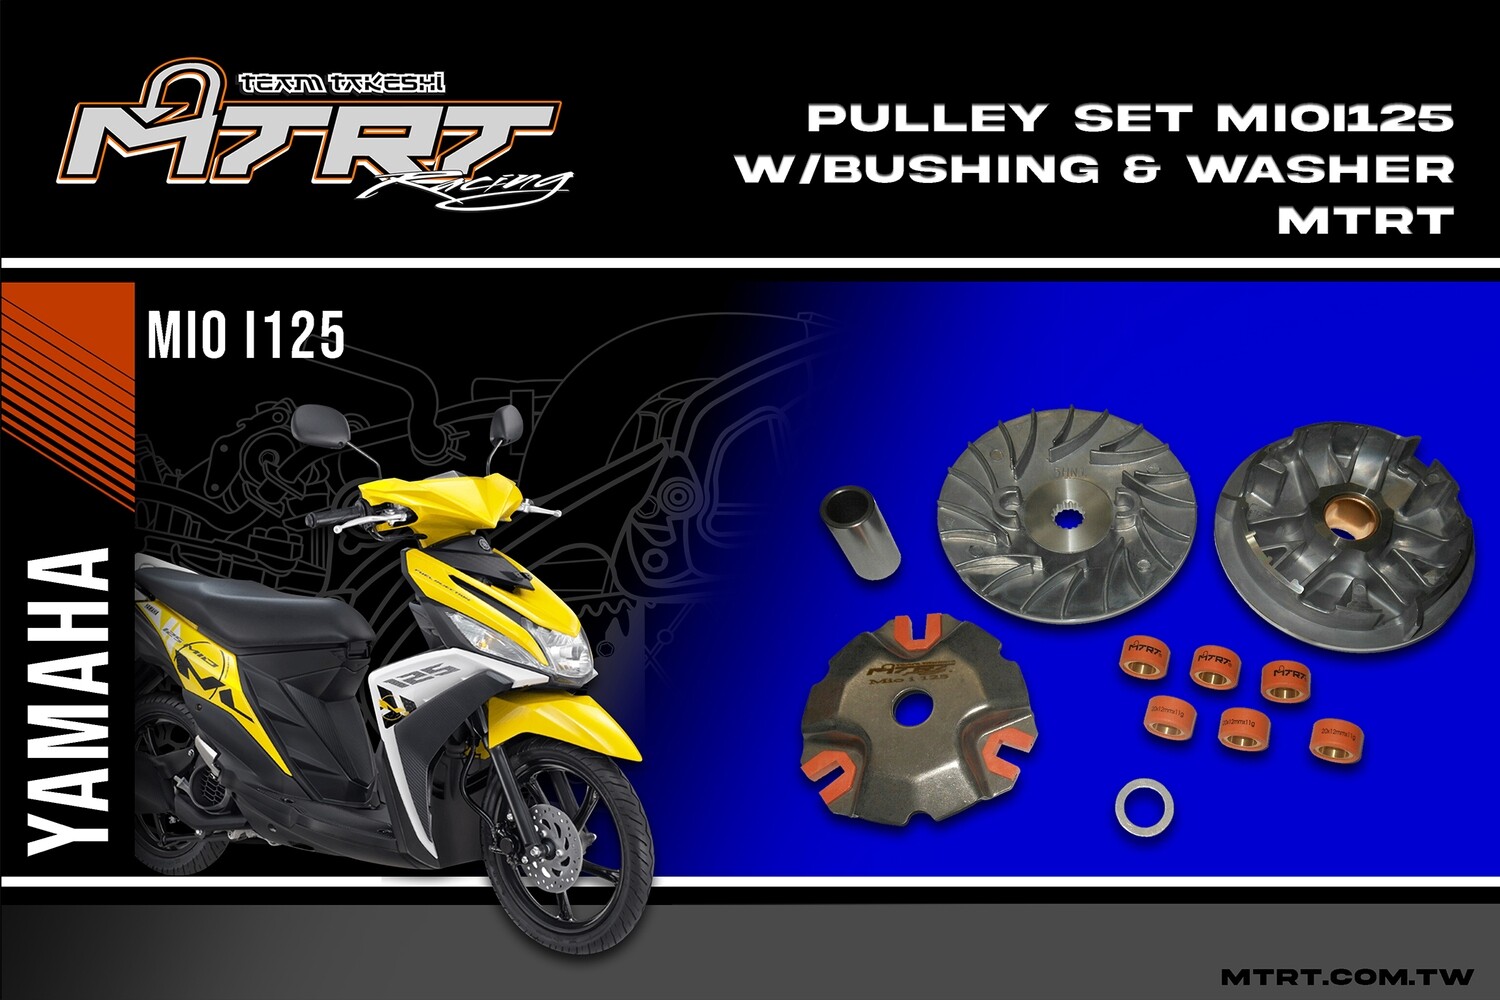 PULLEY SET MIOi125 bushing & washer MTRT